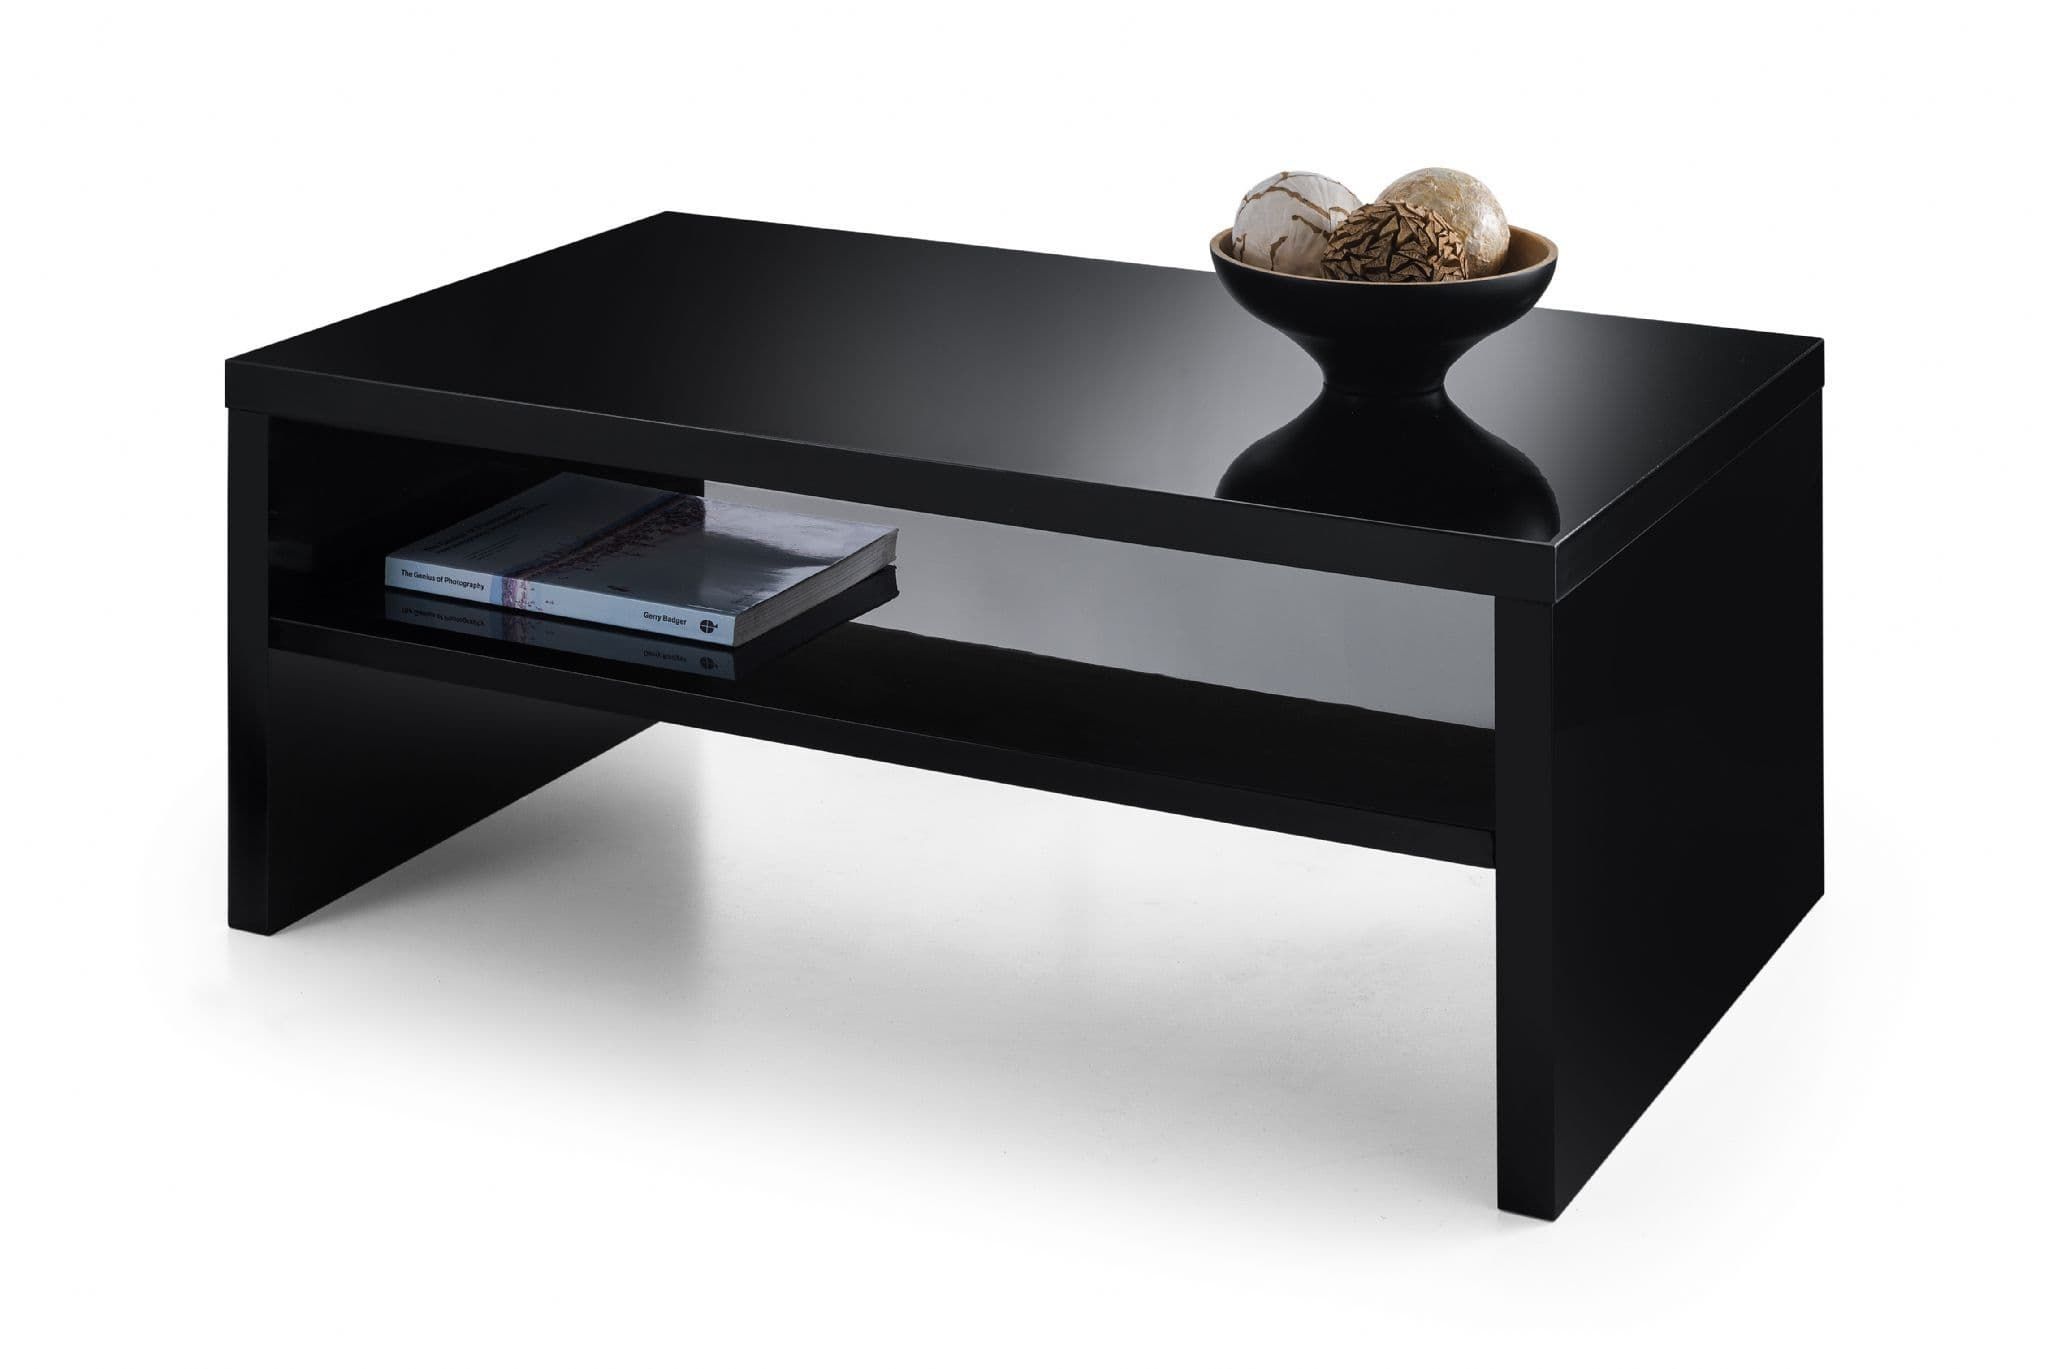 Algeciras Black High Gloss Lacquered Mirror Finish Coffee Table Jb337 Pertaining To High Gloss Black Coffee Tables (View 4 of 15)